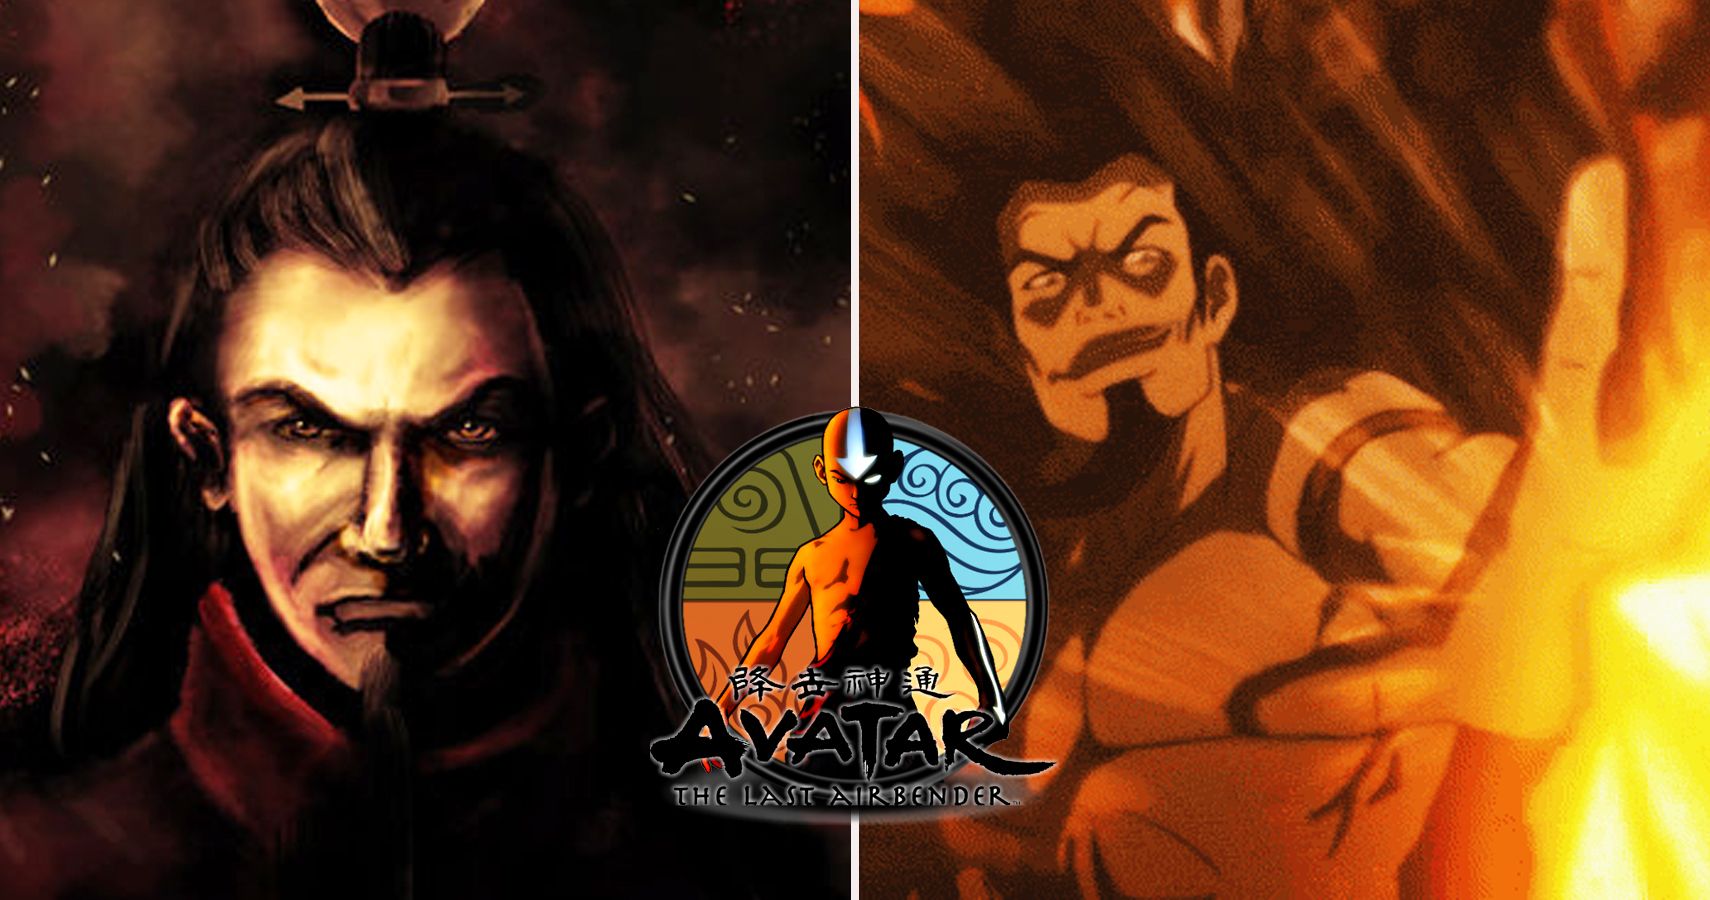 Avatar: The Last Airbender': First-look at Fire Lord Ozai, General Iroh,  Azula - Los Angeles Times